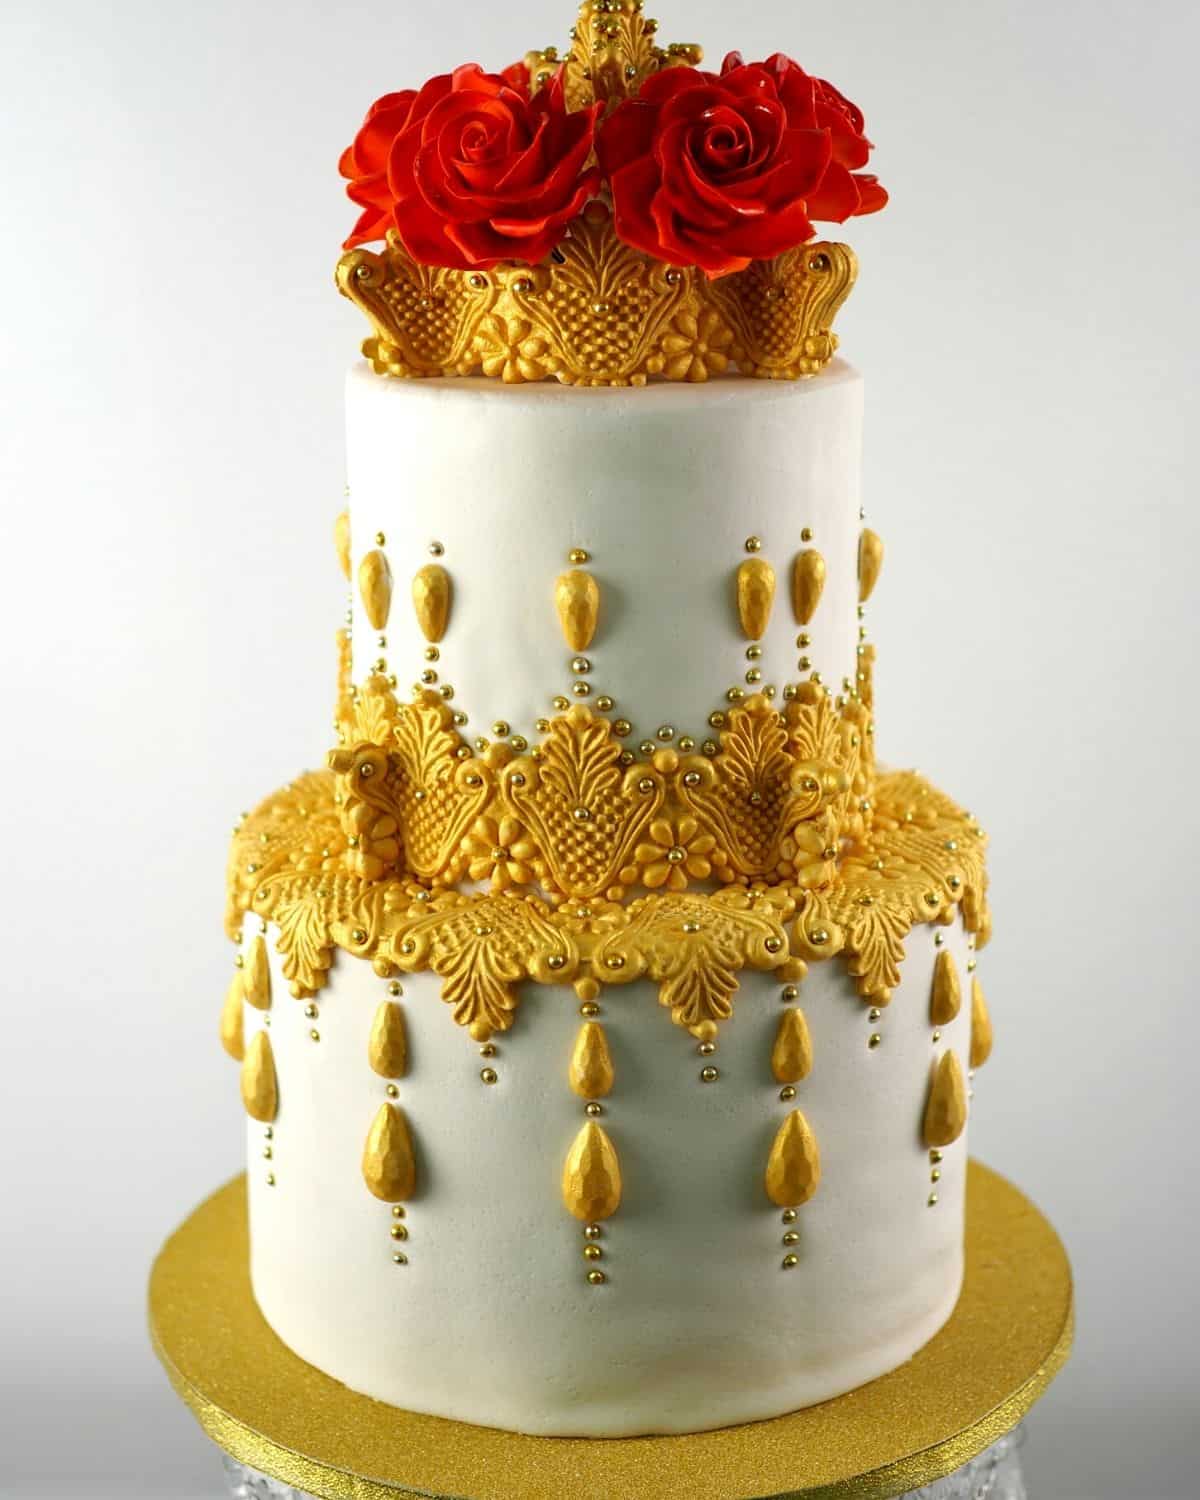 A white cake decorated with gold painted molded fondant and gold dragees